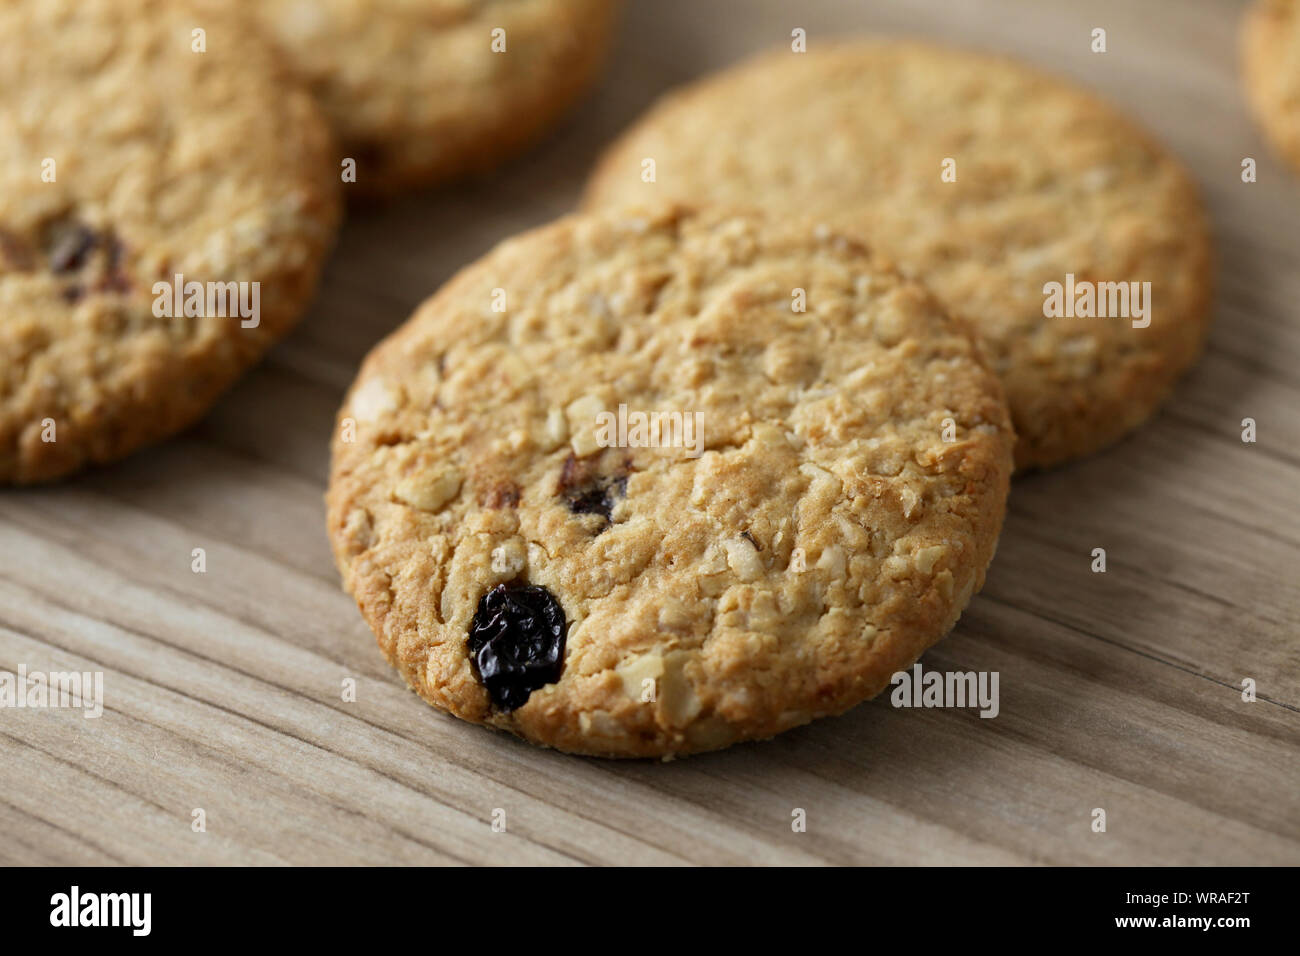 biscuit cookies closeup isolated on wood table Stock Photo